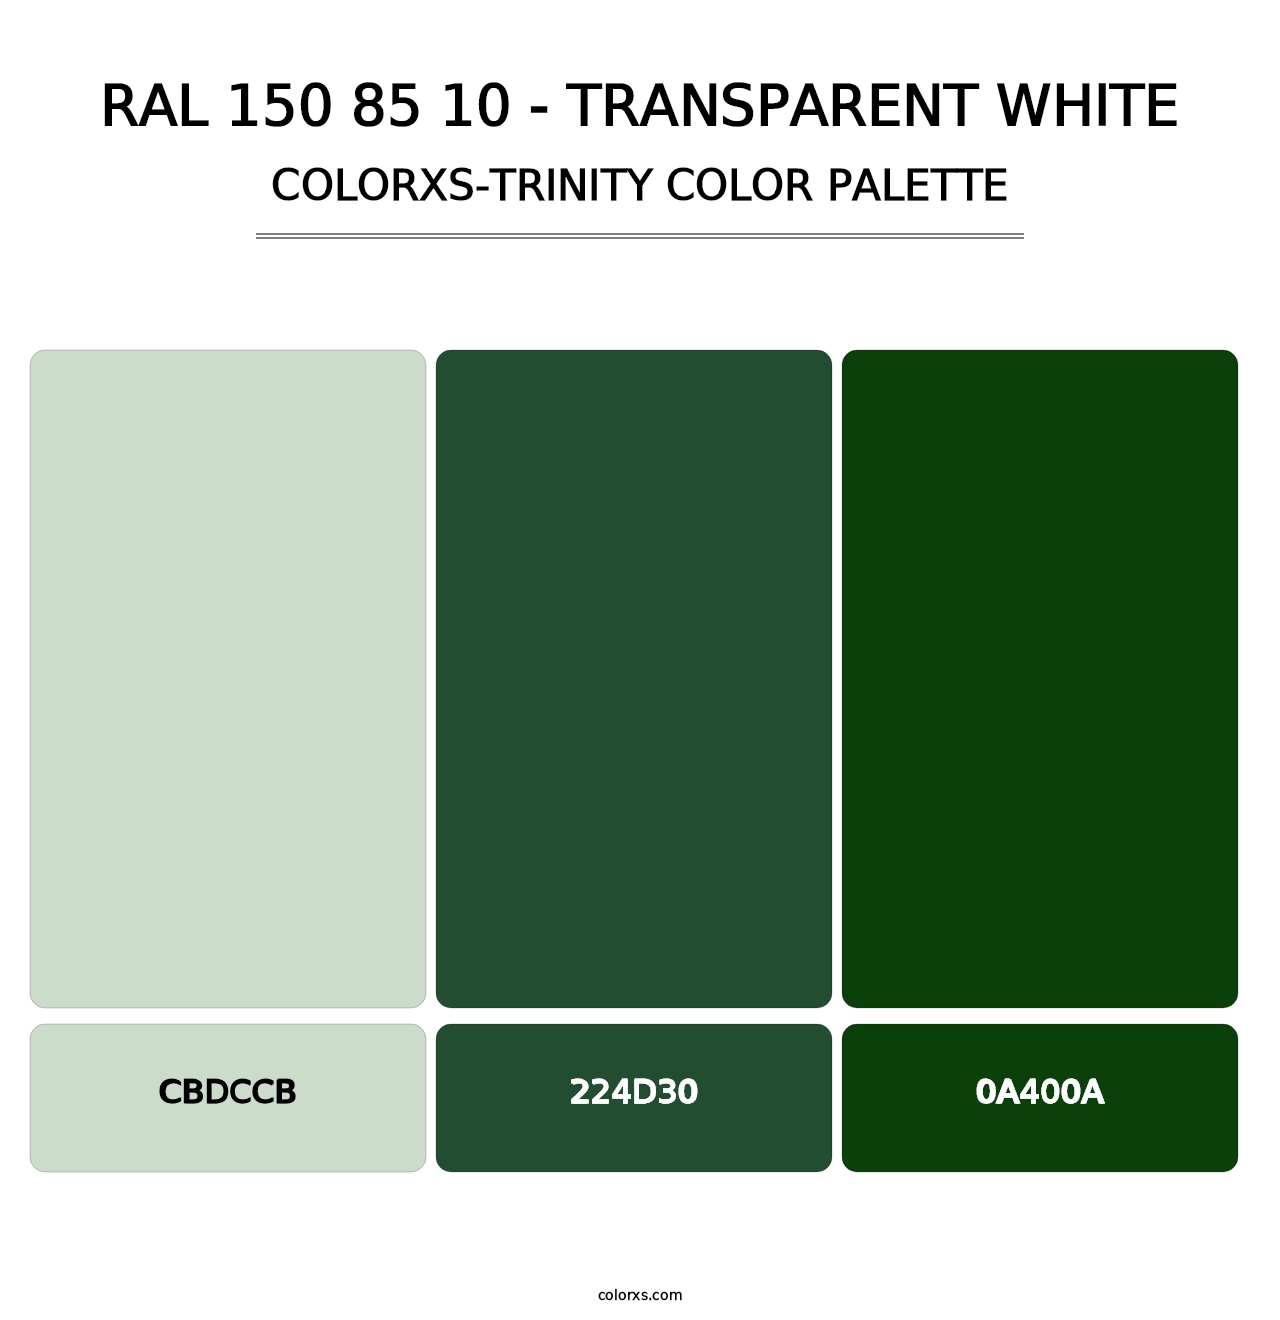 RAL 150 85 10 - Transparent White - Colorxs Trinity Palette